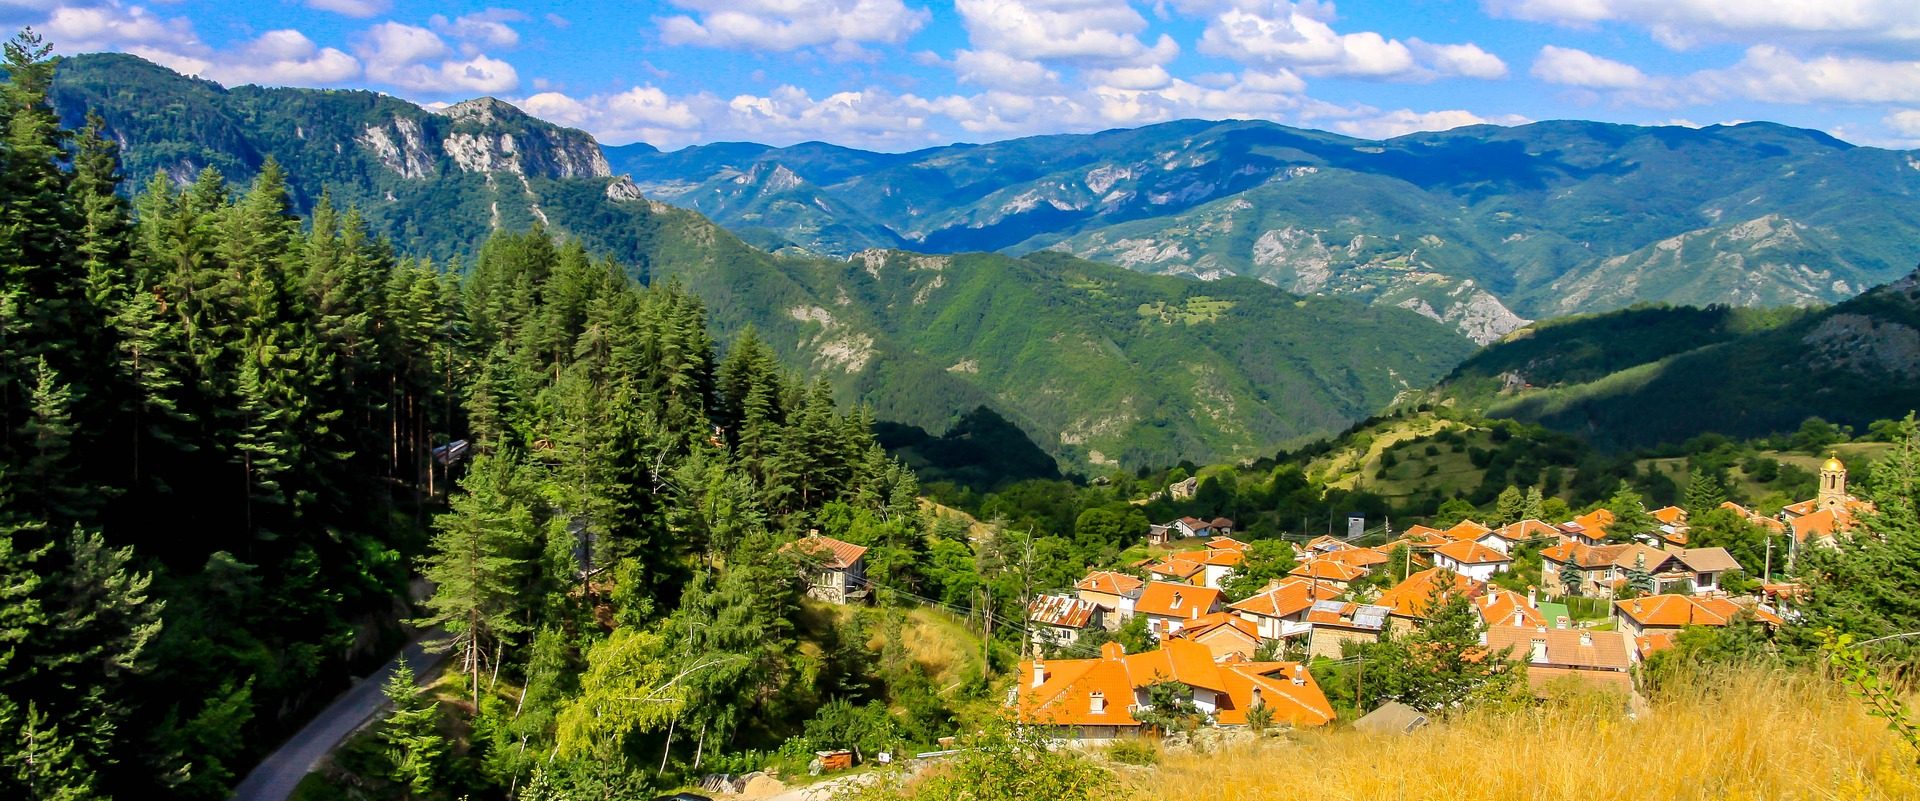 houses in a beautiful setting - expats living in bulgaria